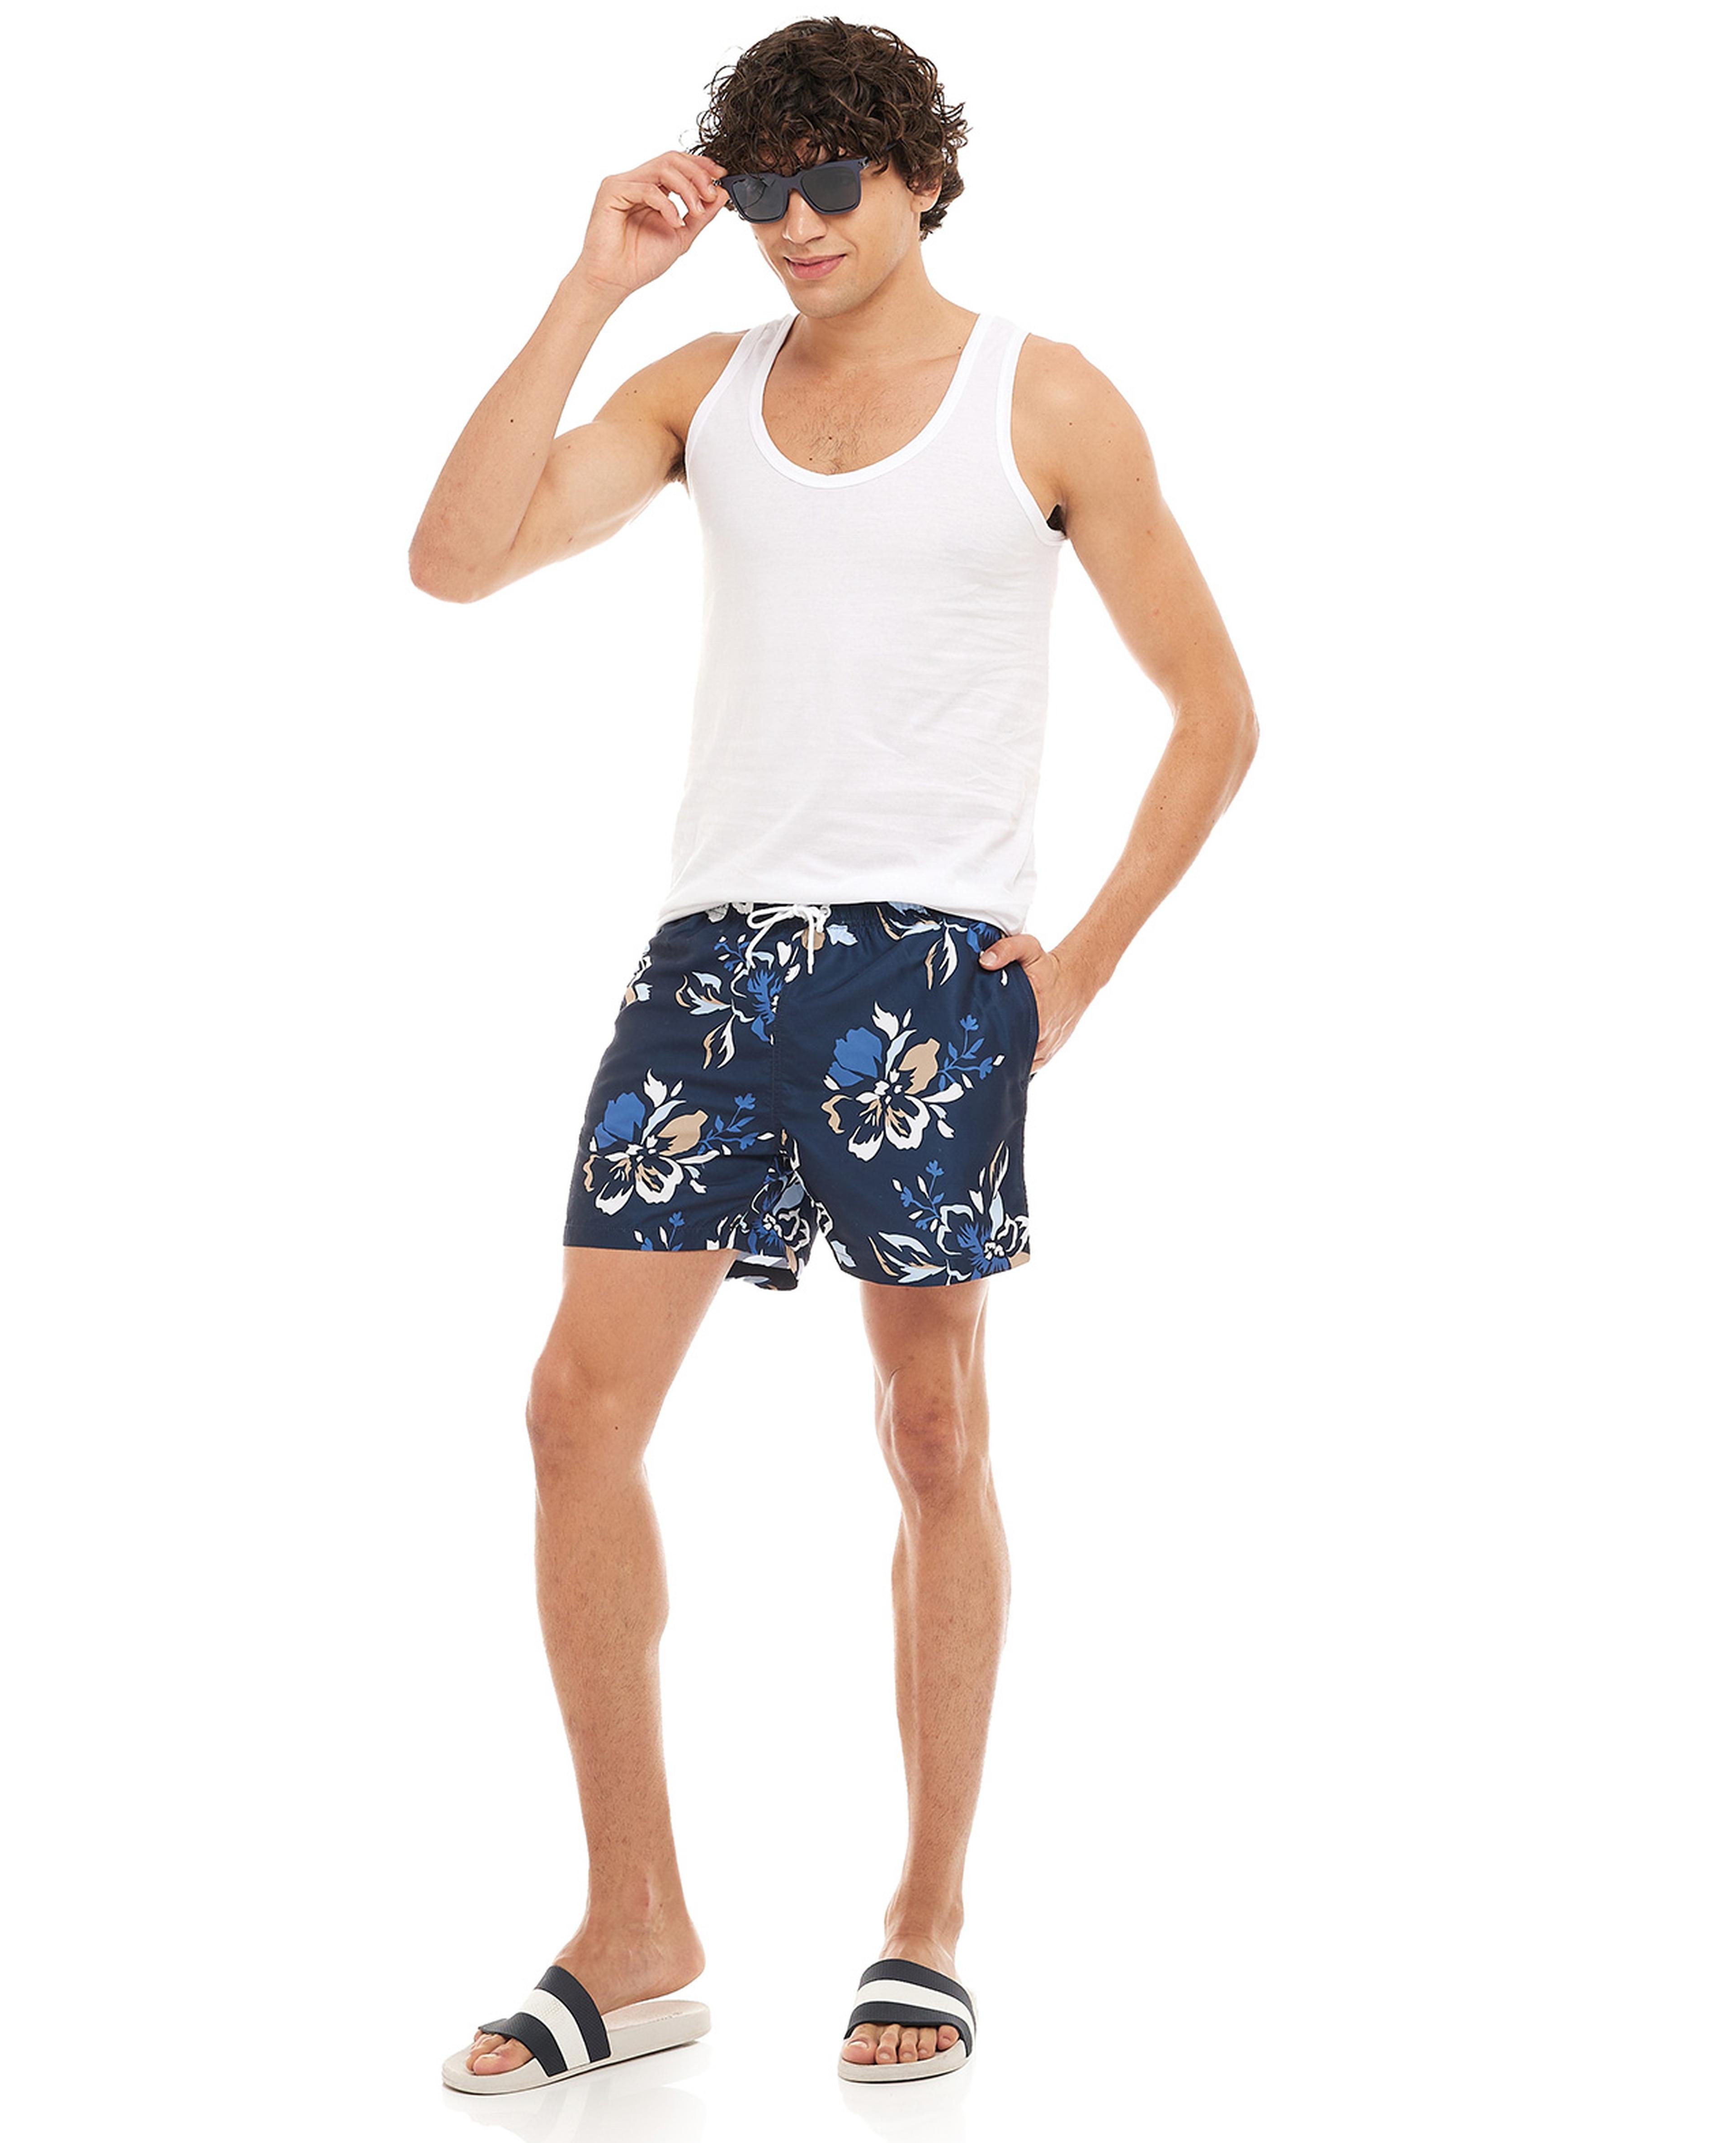 Patterned Shorts with Drawstring Waist